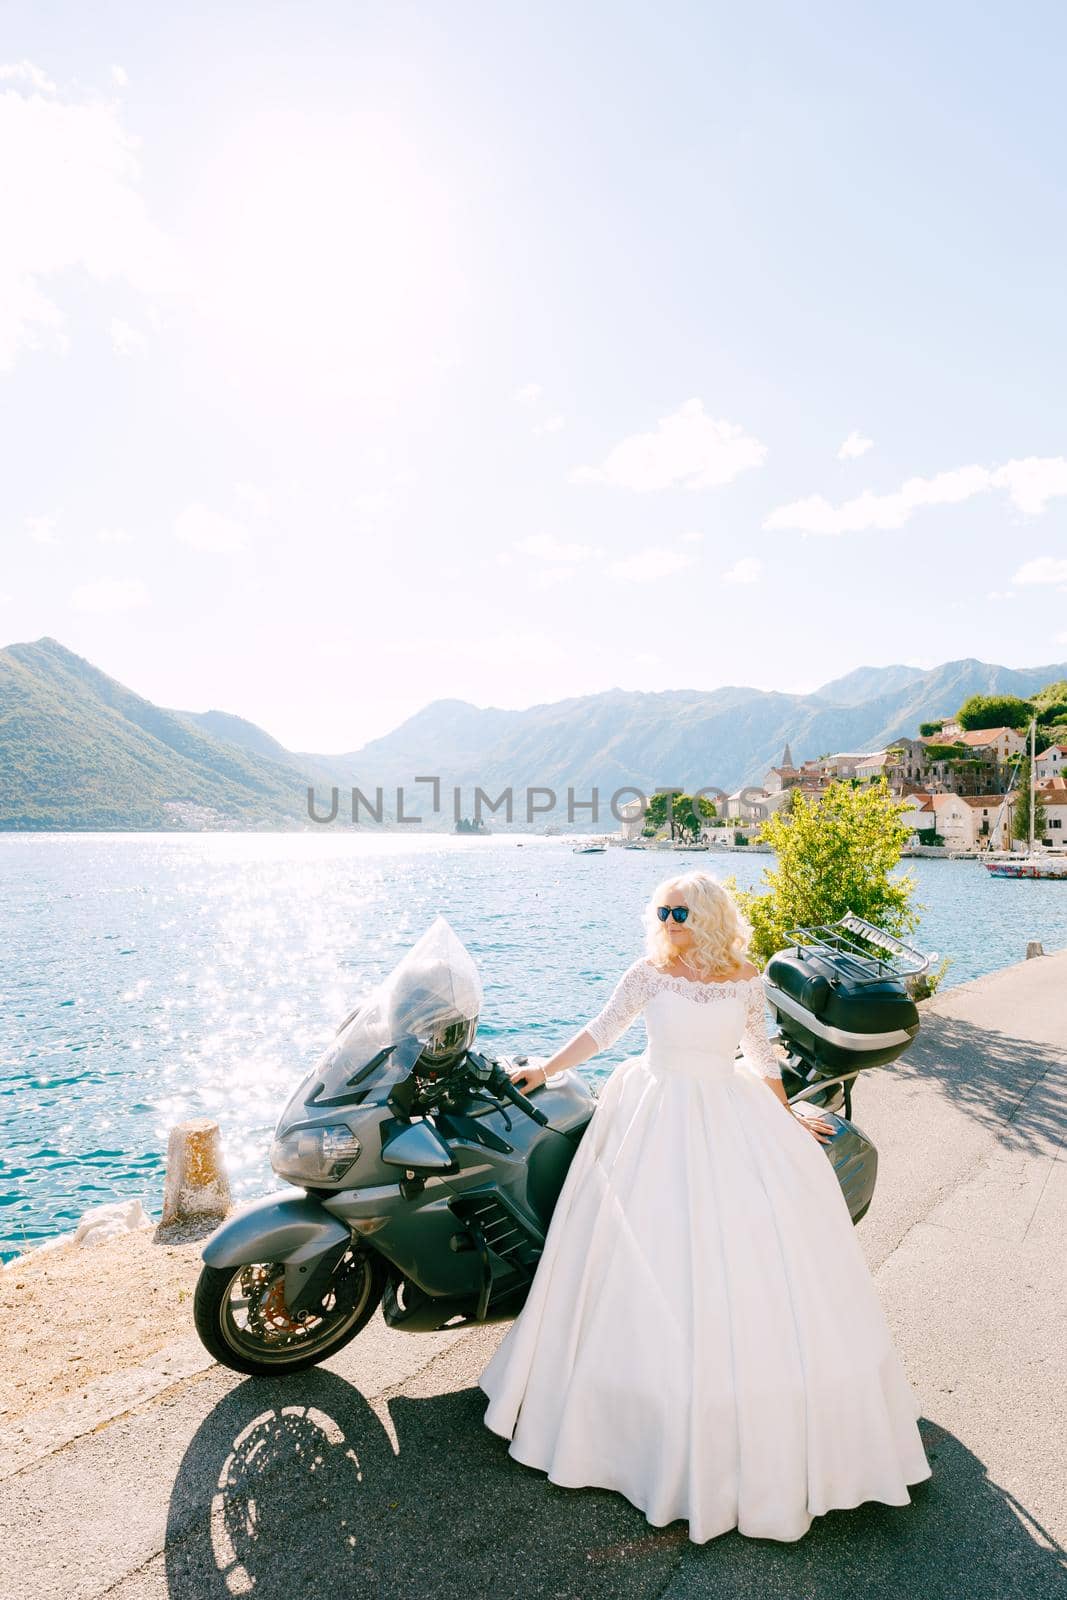 A bride in sunglasses and a wedding dress stands near a motorcycle on the pier in the old town of Perast by Nadtochiy